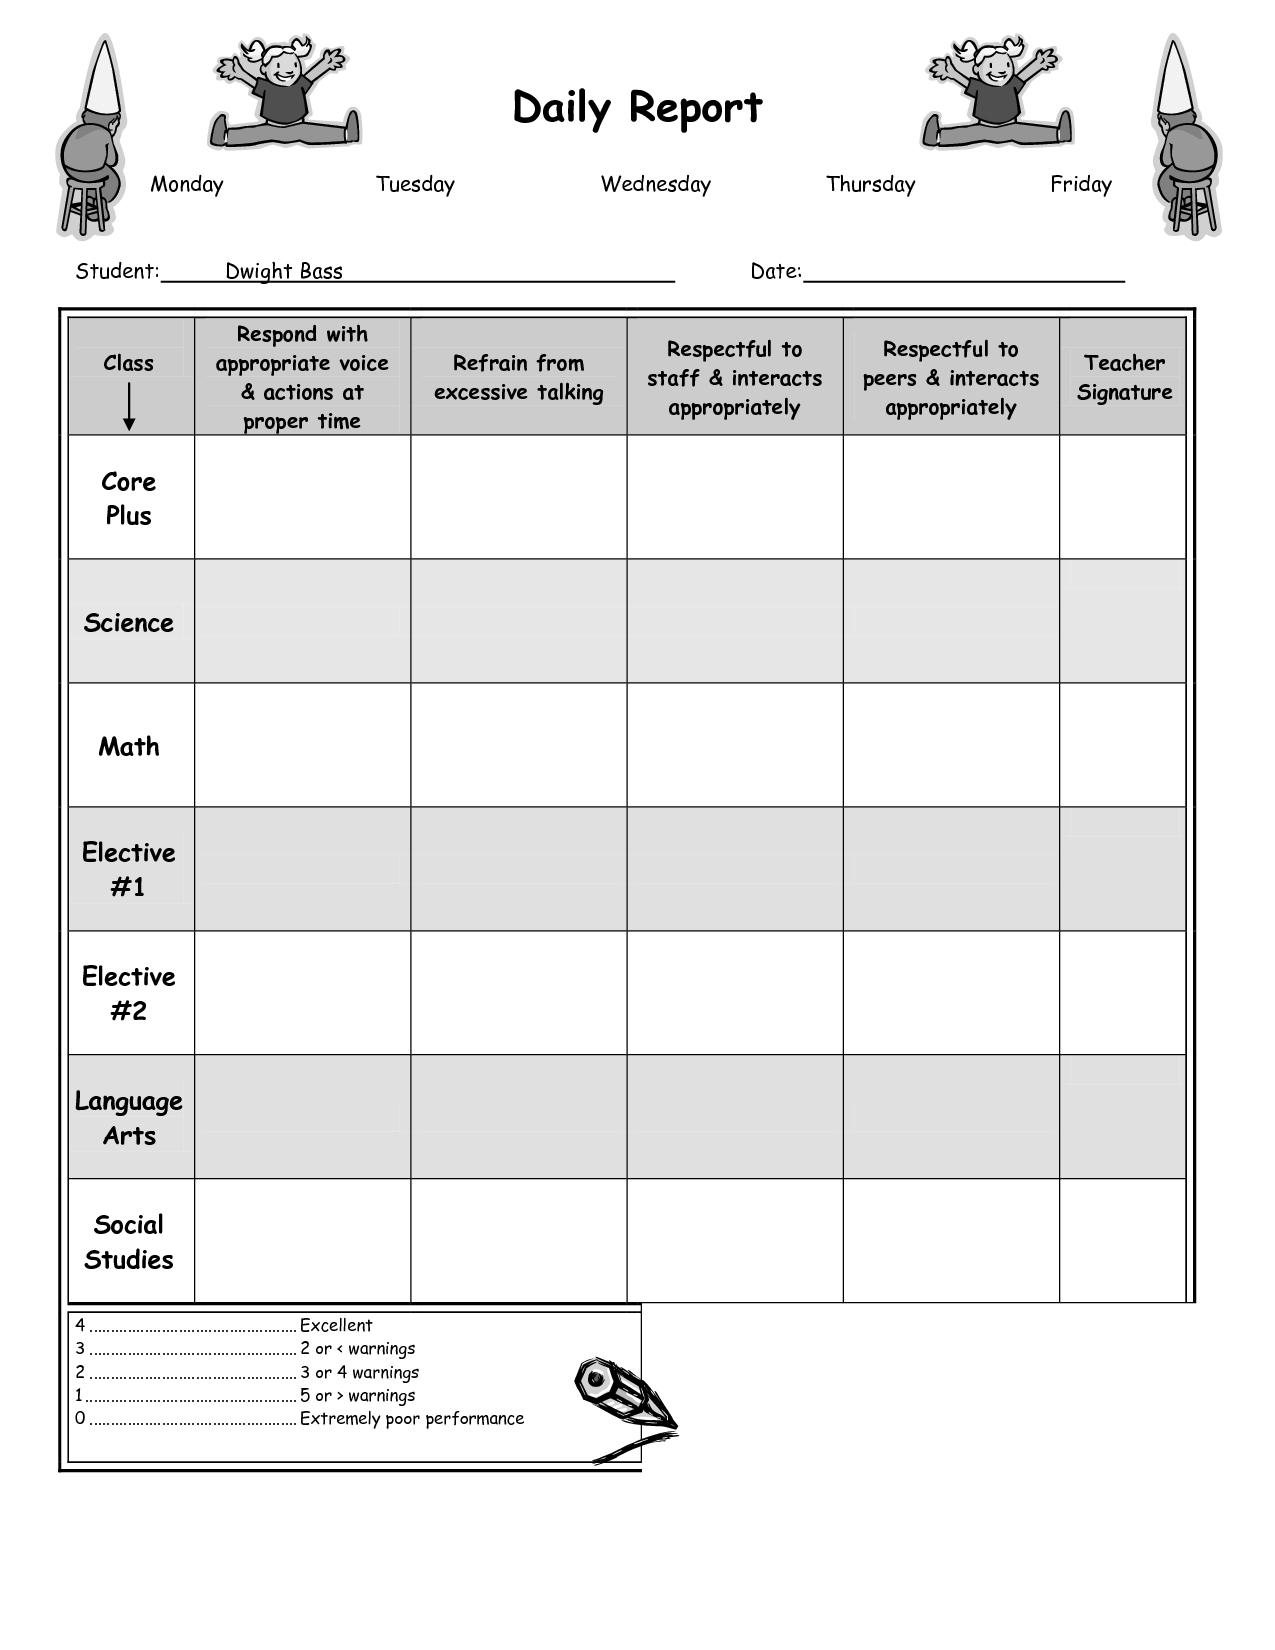 Daily Report Card Template For Adhd – Best Professional Intended For Daily Report Card Template For Adhd